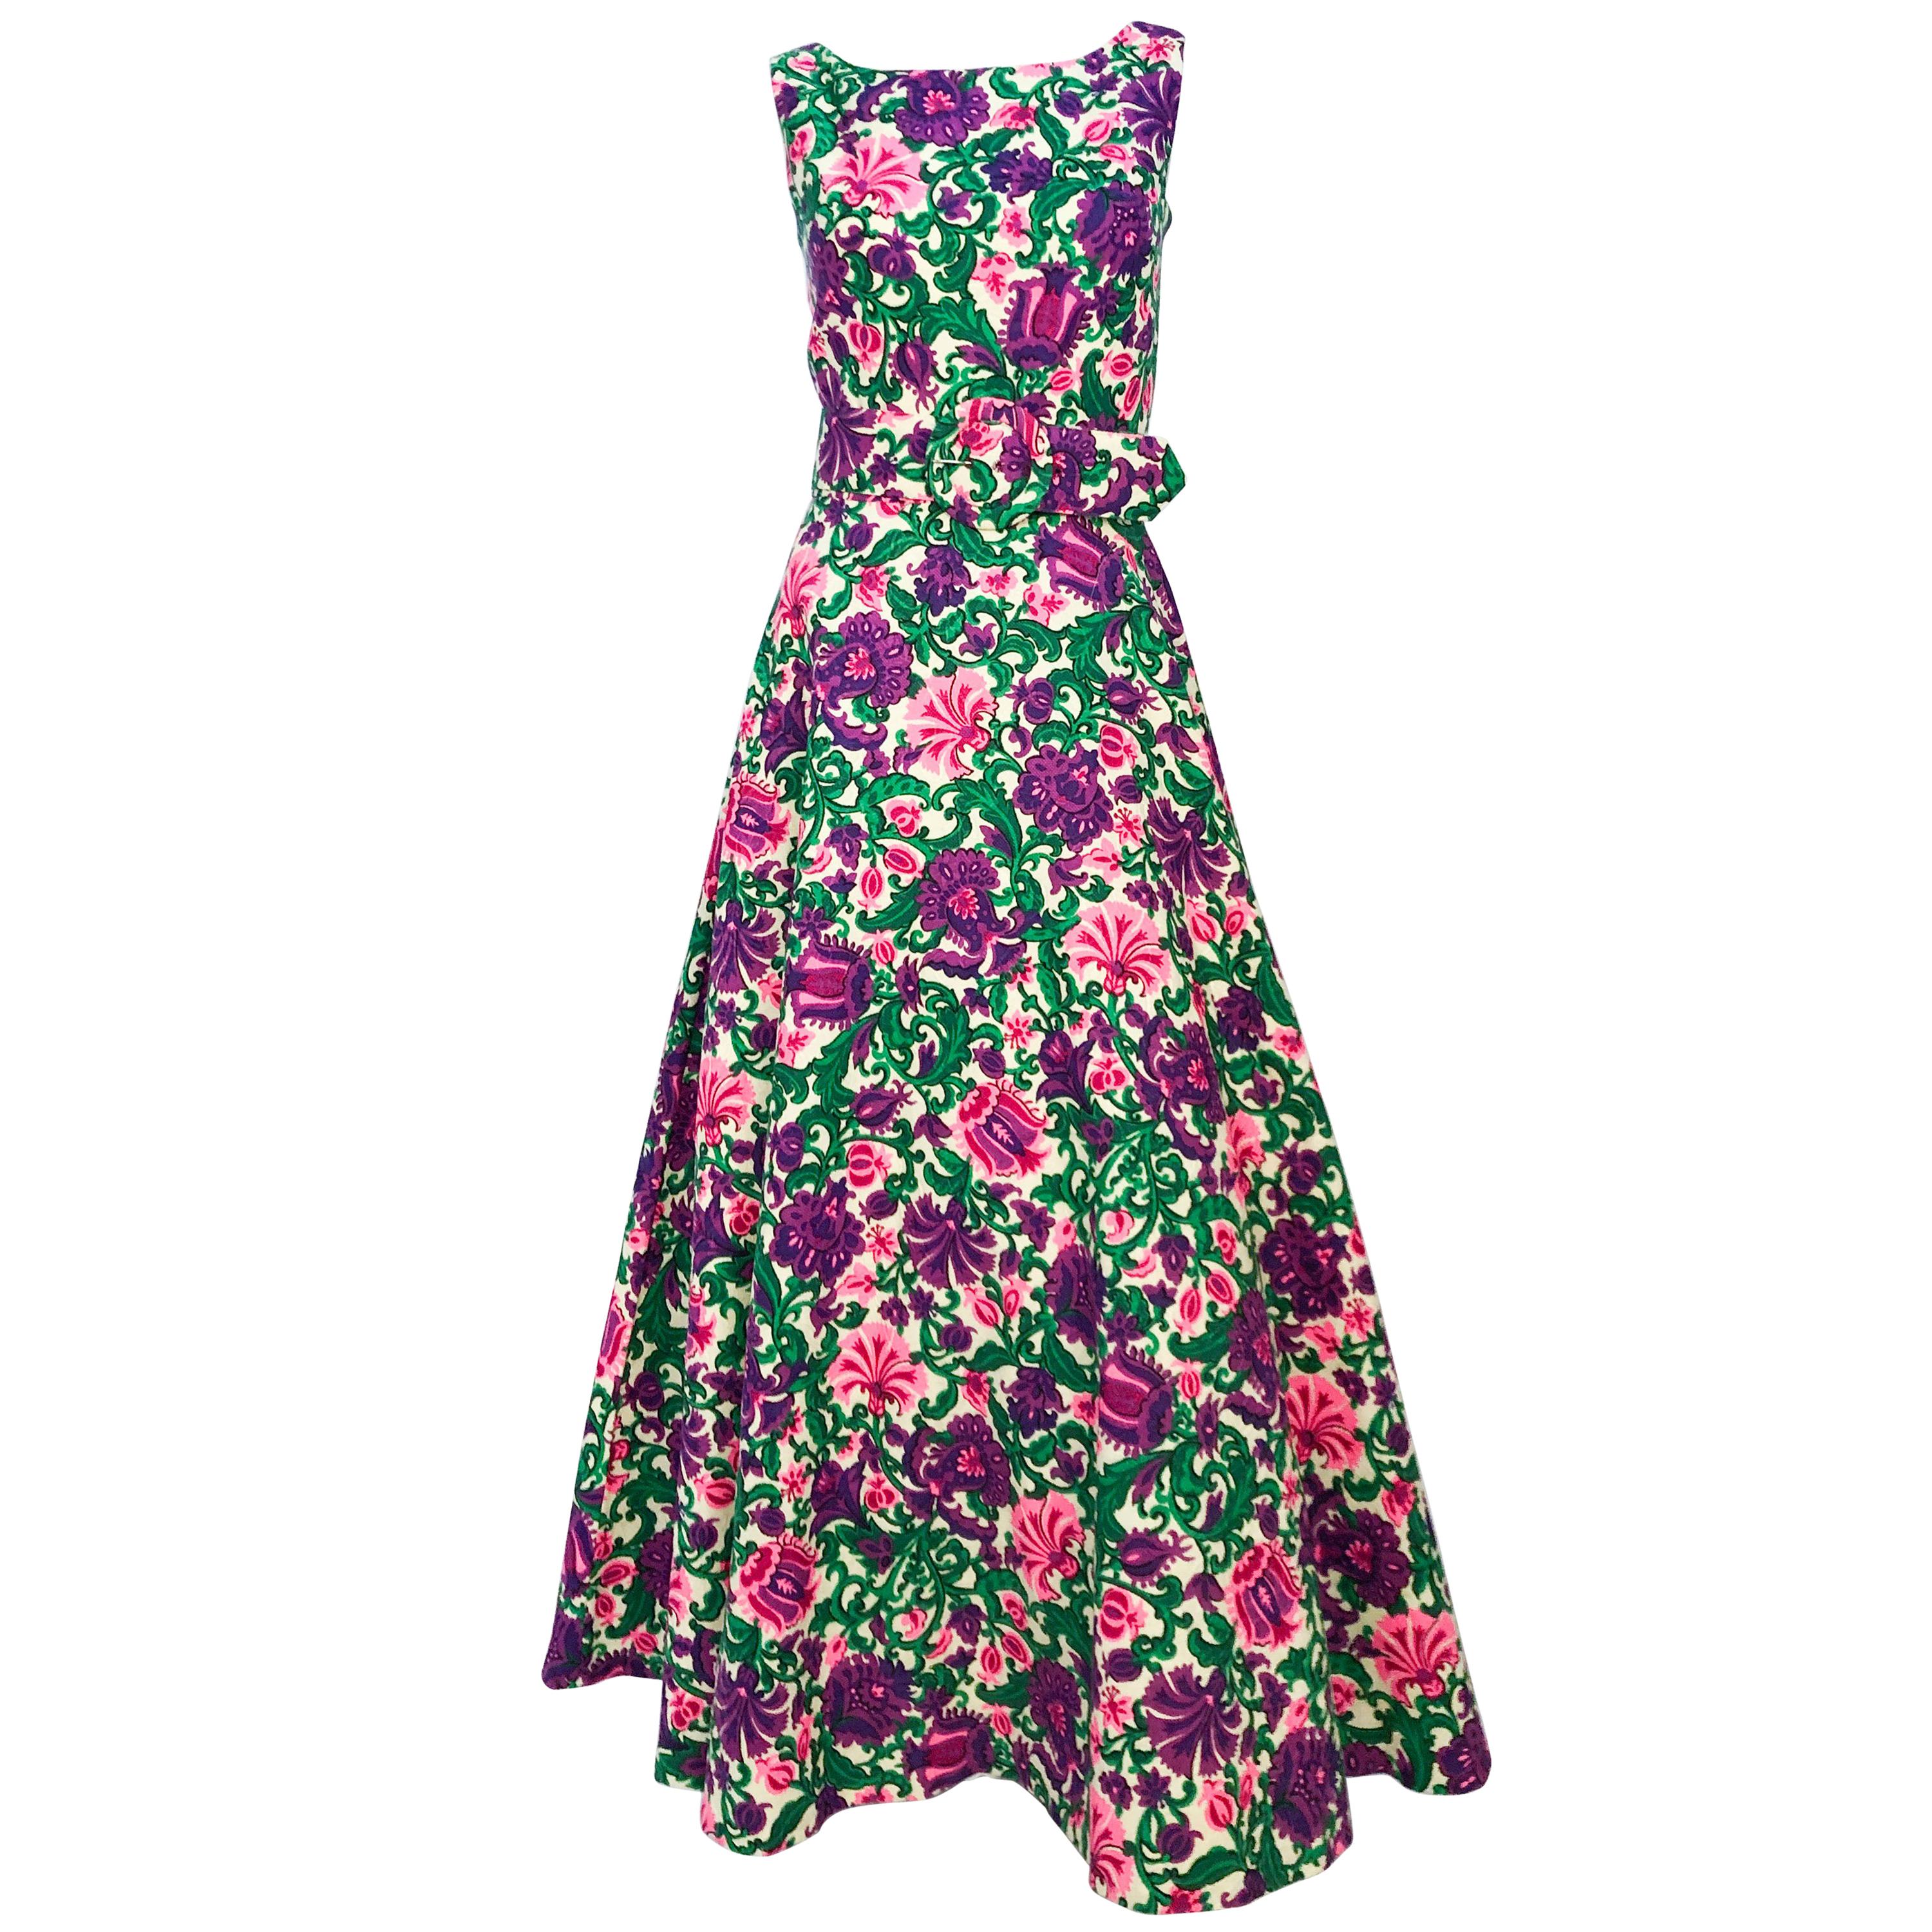 1960s Floral Printed Dress on Jacquard with Matching Belt  For Sale